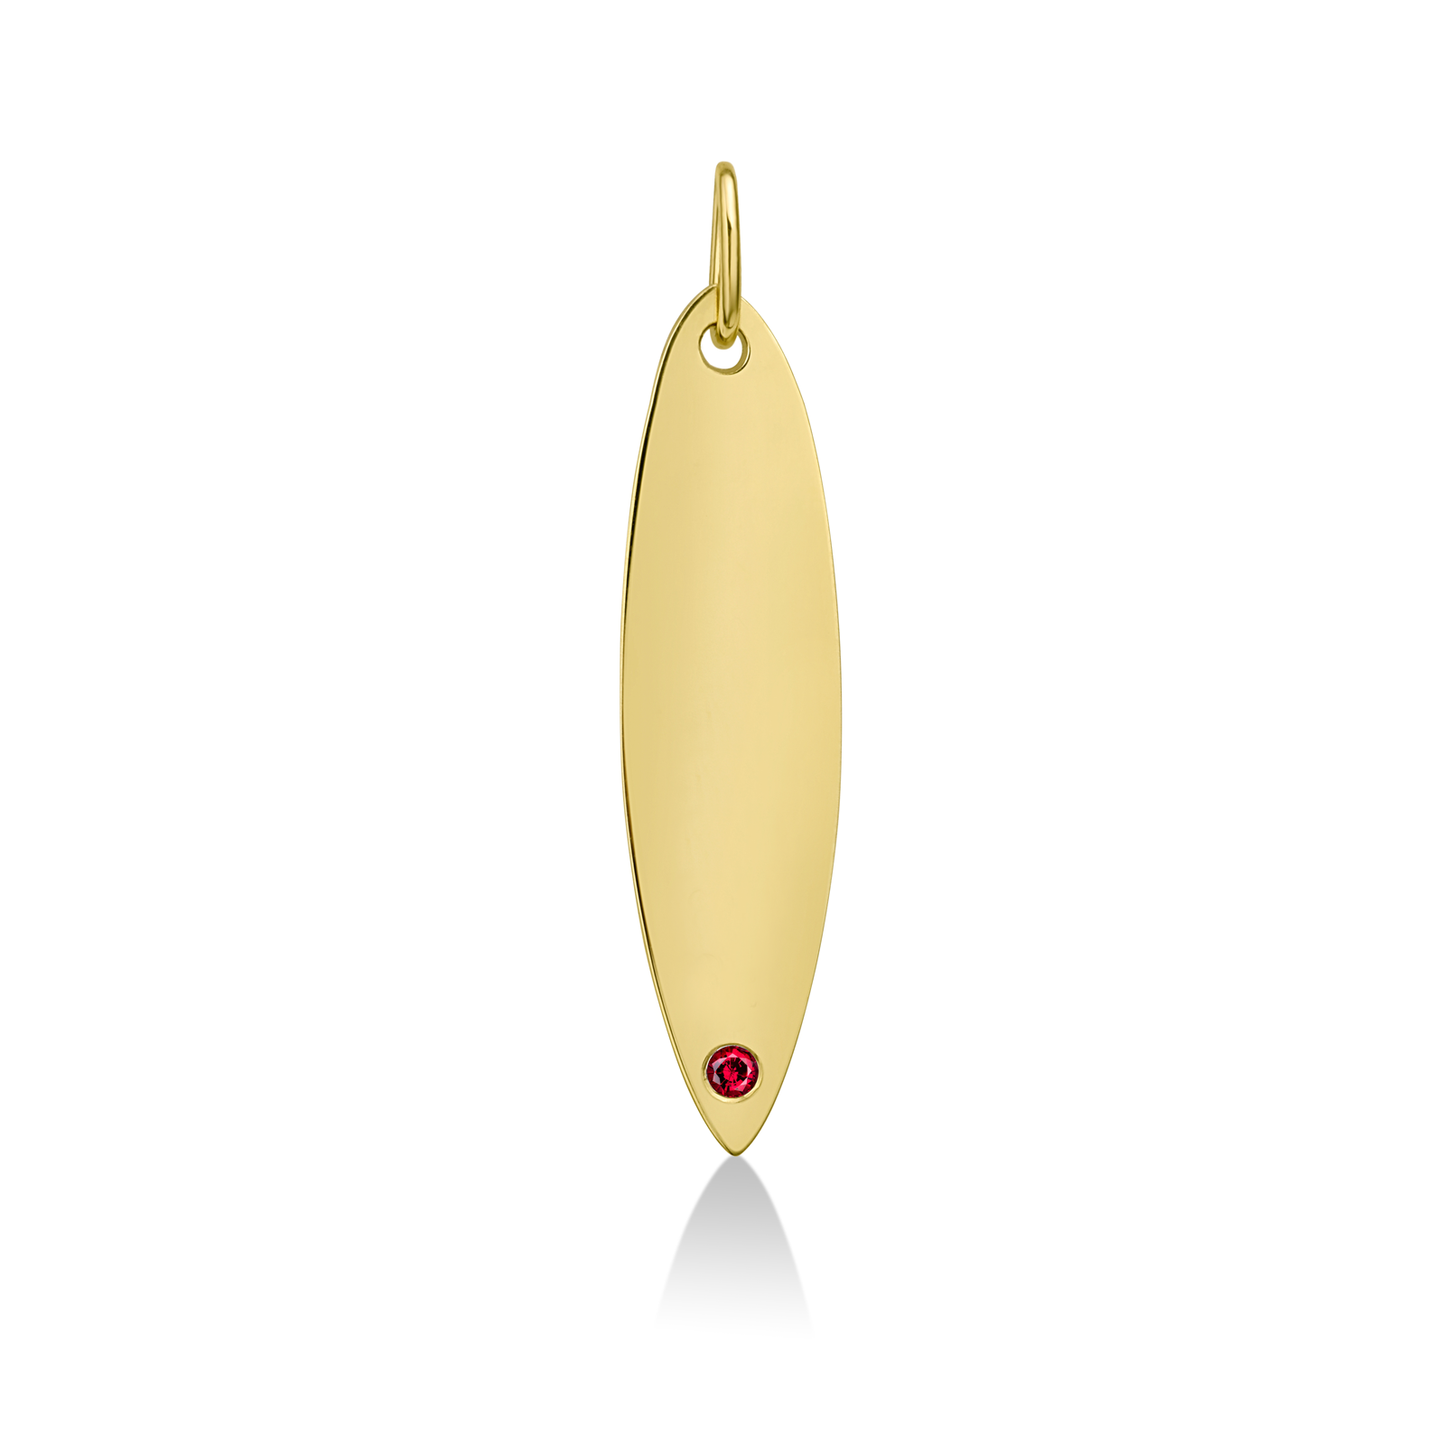 14k gold surfboard charm lock with ruby